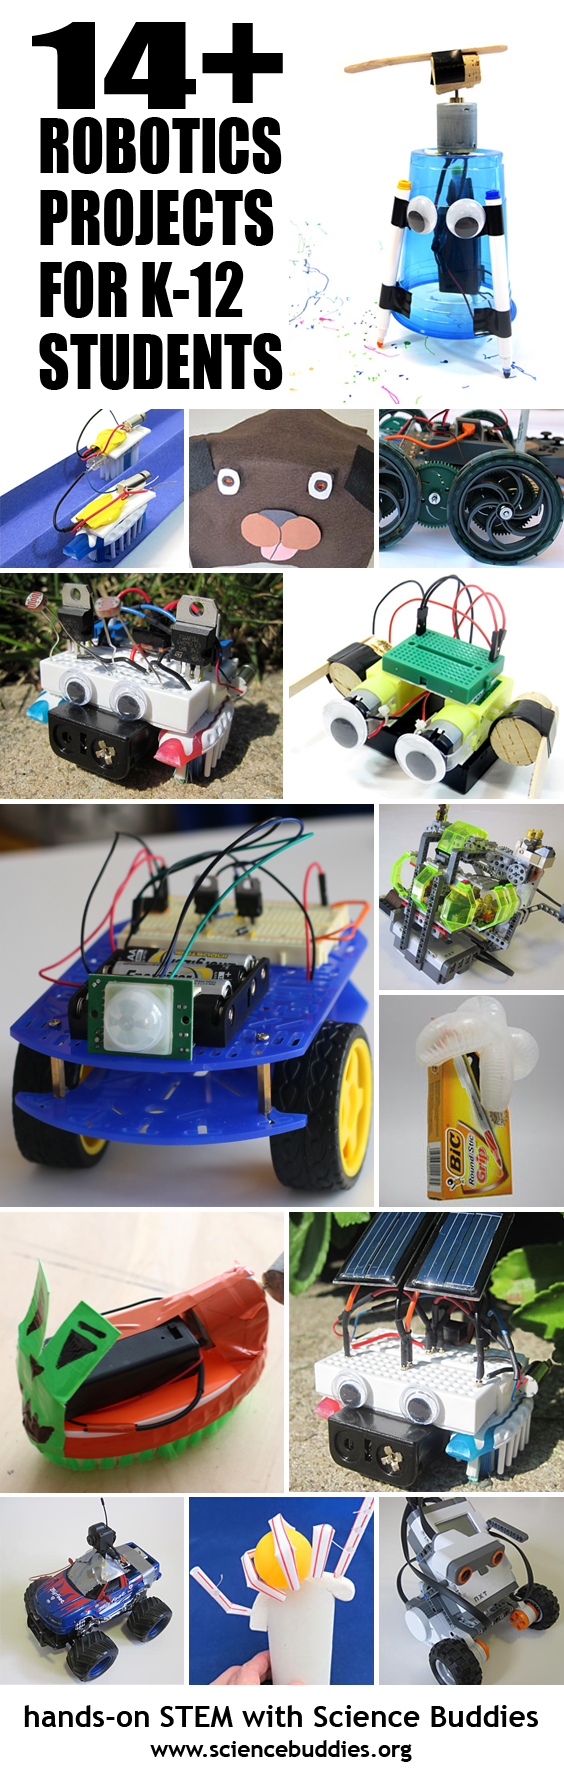 collection has great hands on robotics engineering projects to explore 